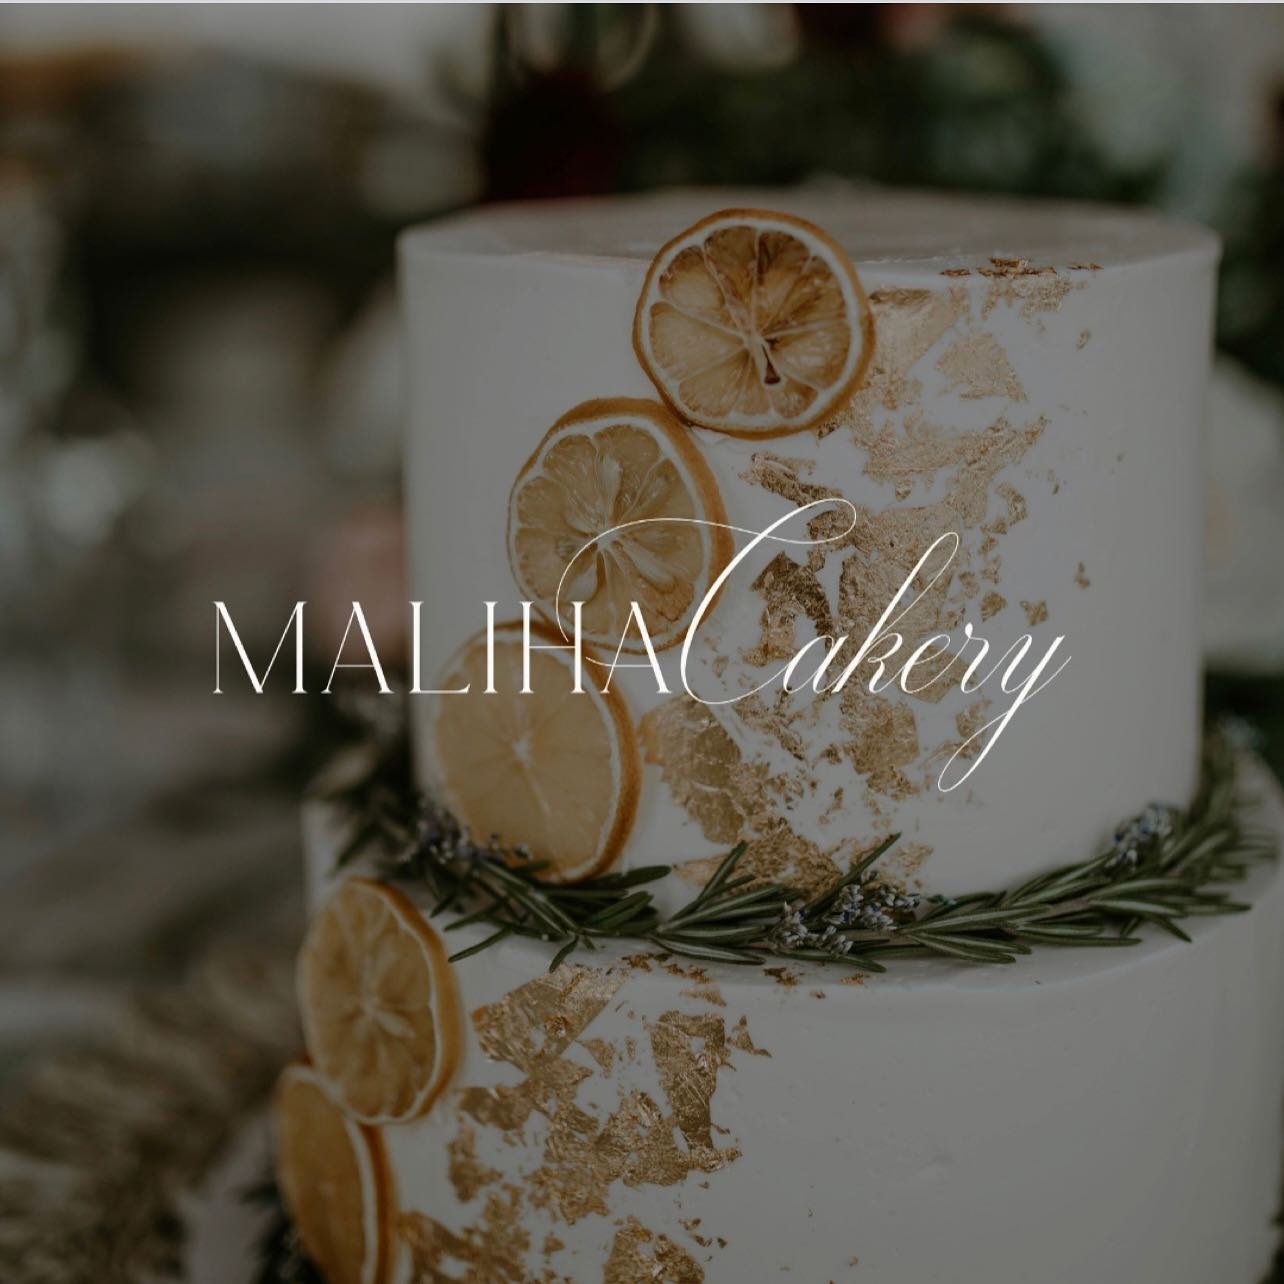 Every &ldquo;I do&rdquo; deserves a luxe cake to celebrate! 

Enter Maliha Cakery, the ultimate luxe wedding cake experience in Charlottesville, VA. 

Owner Anita Gupta, worked with our designer Lauren McKenzie, to bring this brand vision to life. We